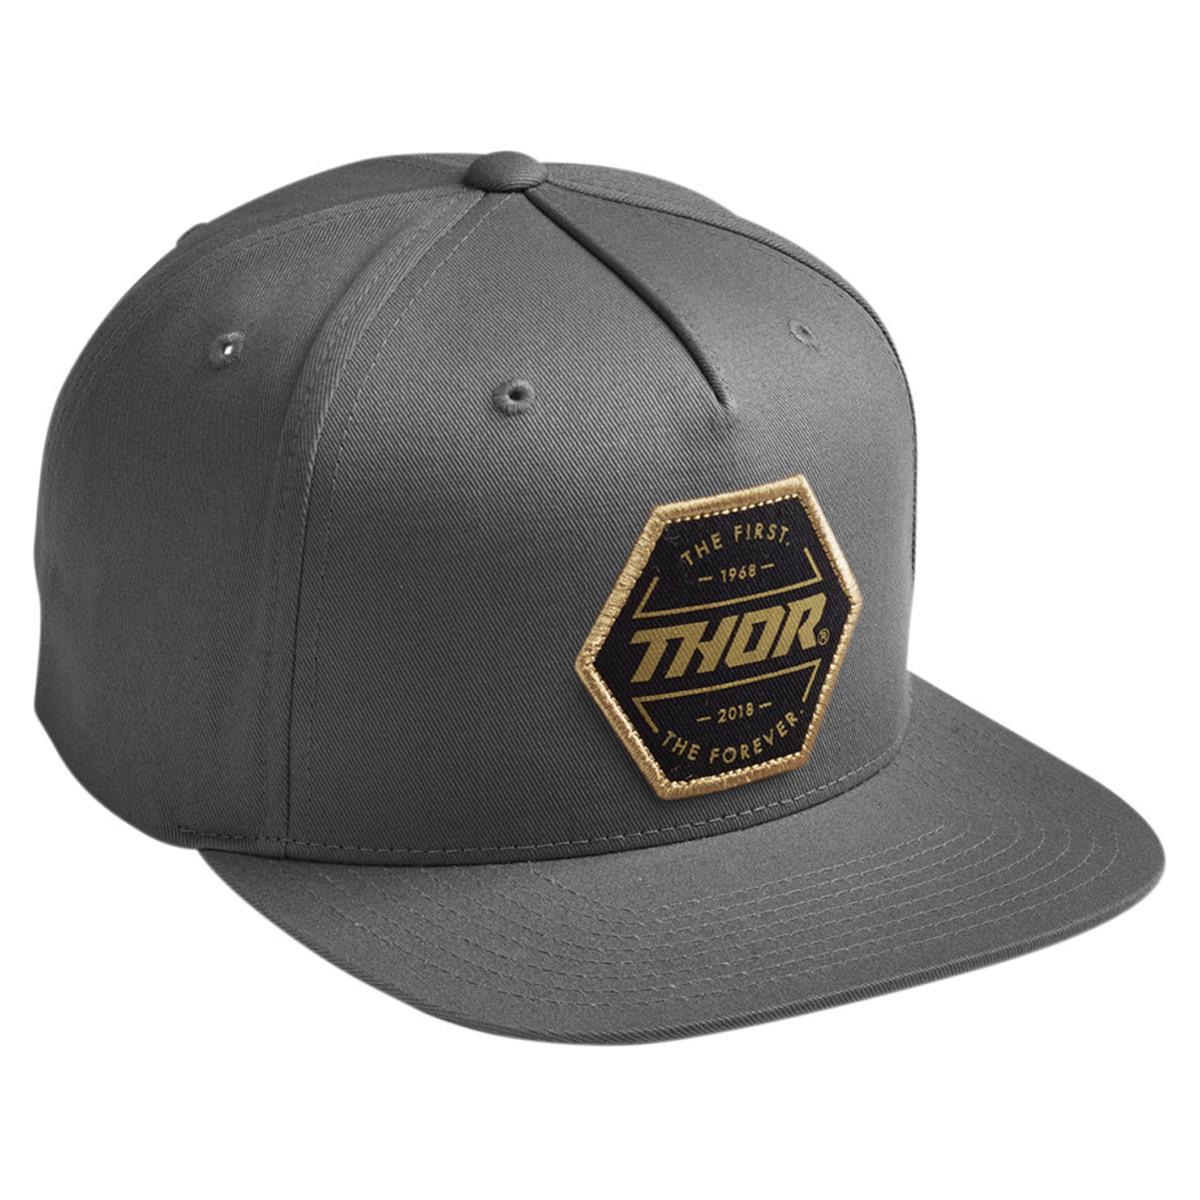 Thor Snapback Cap Forever Charcoal